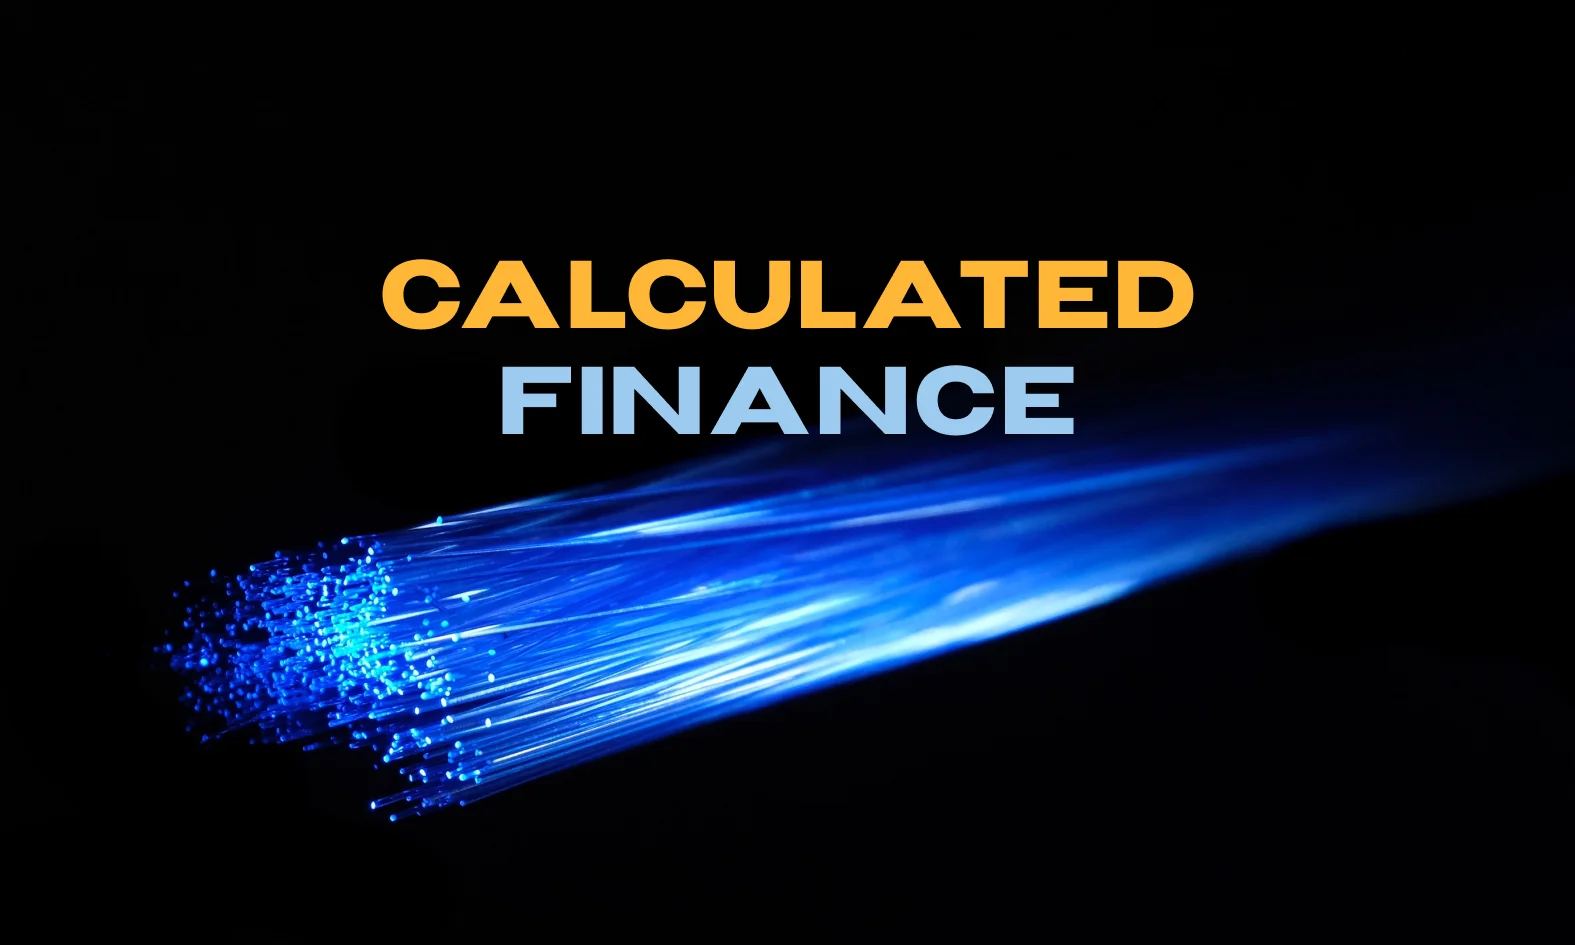 Calculated Finance image